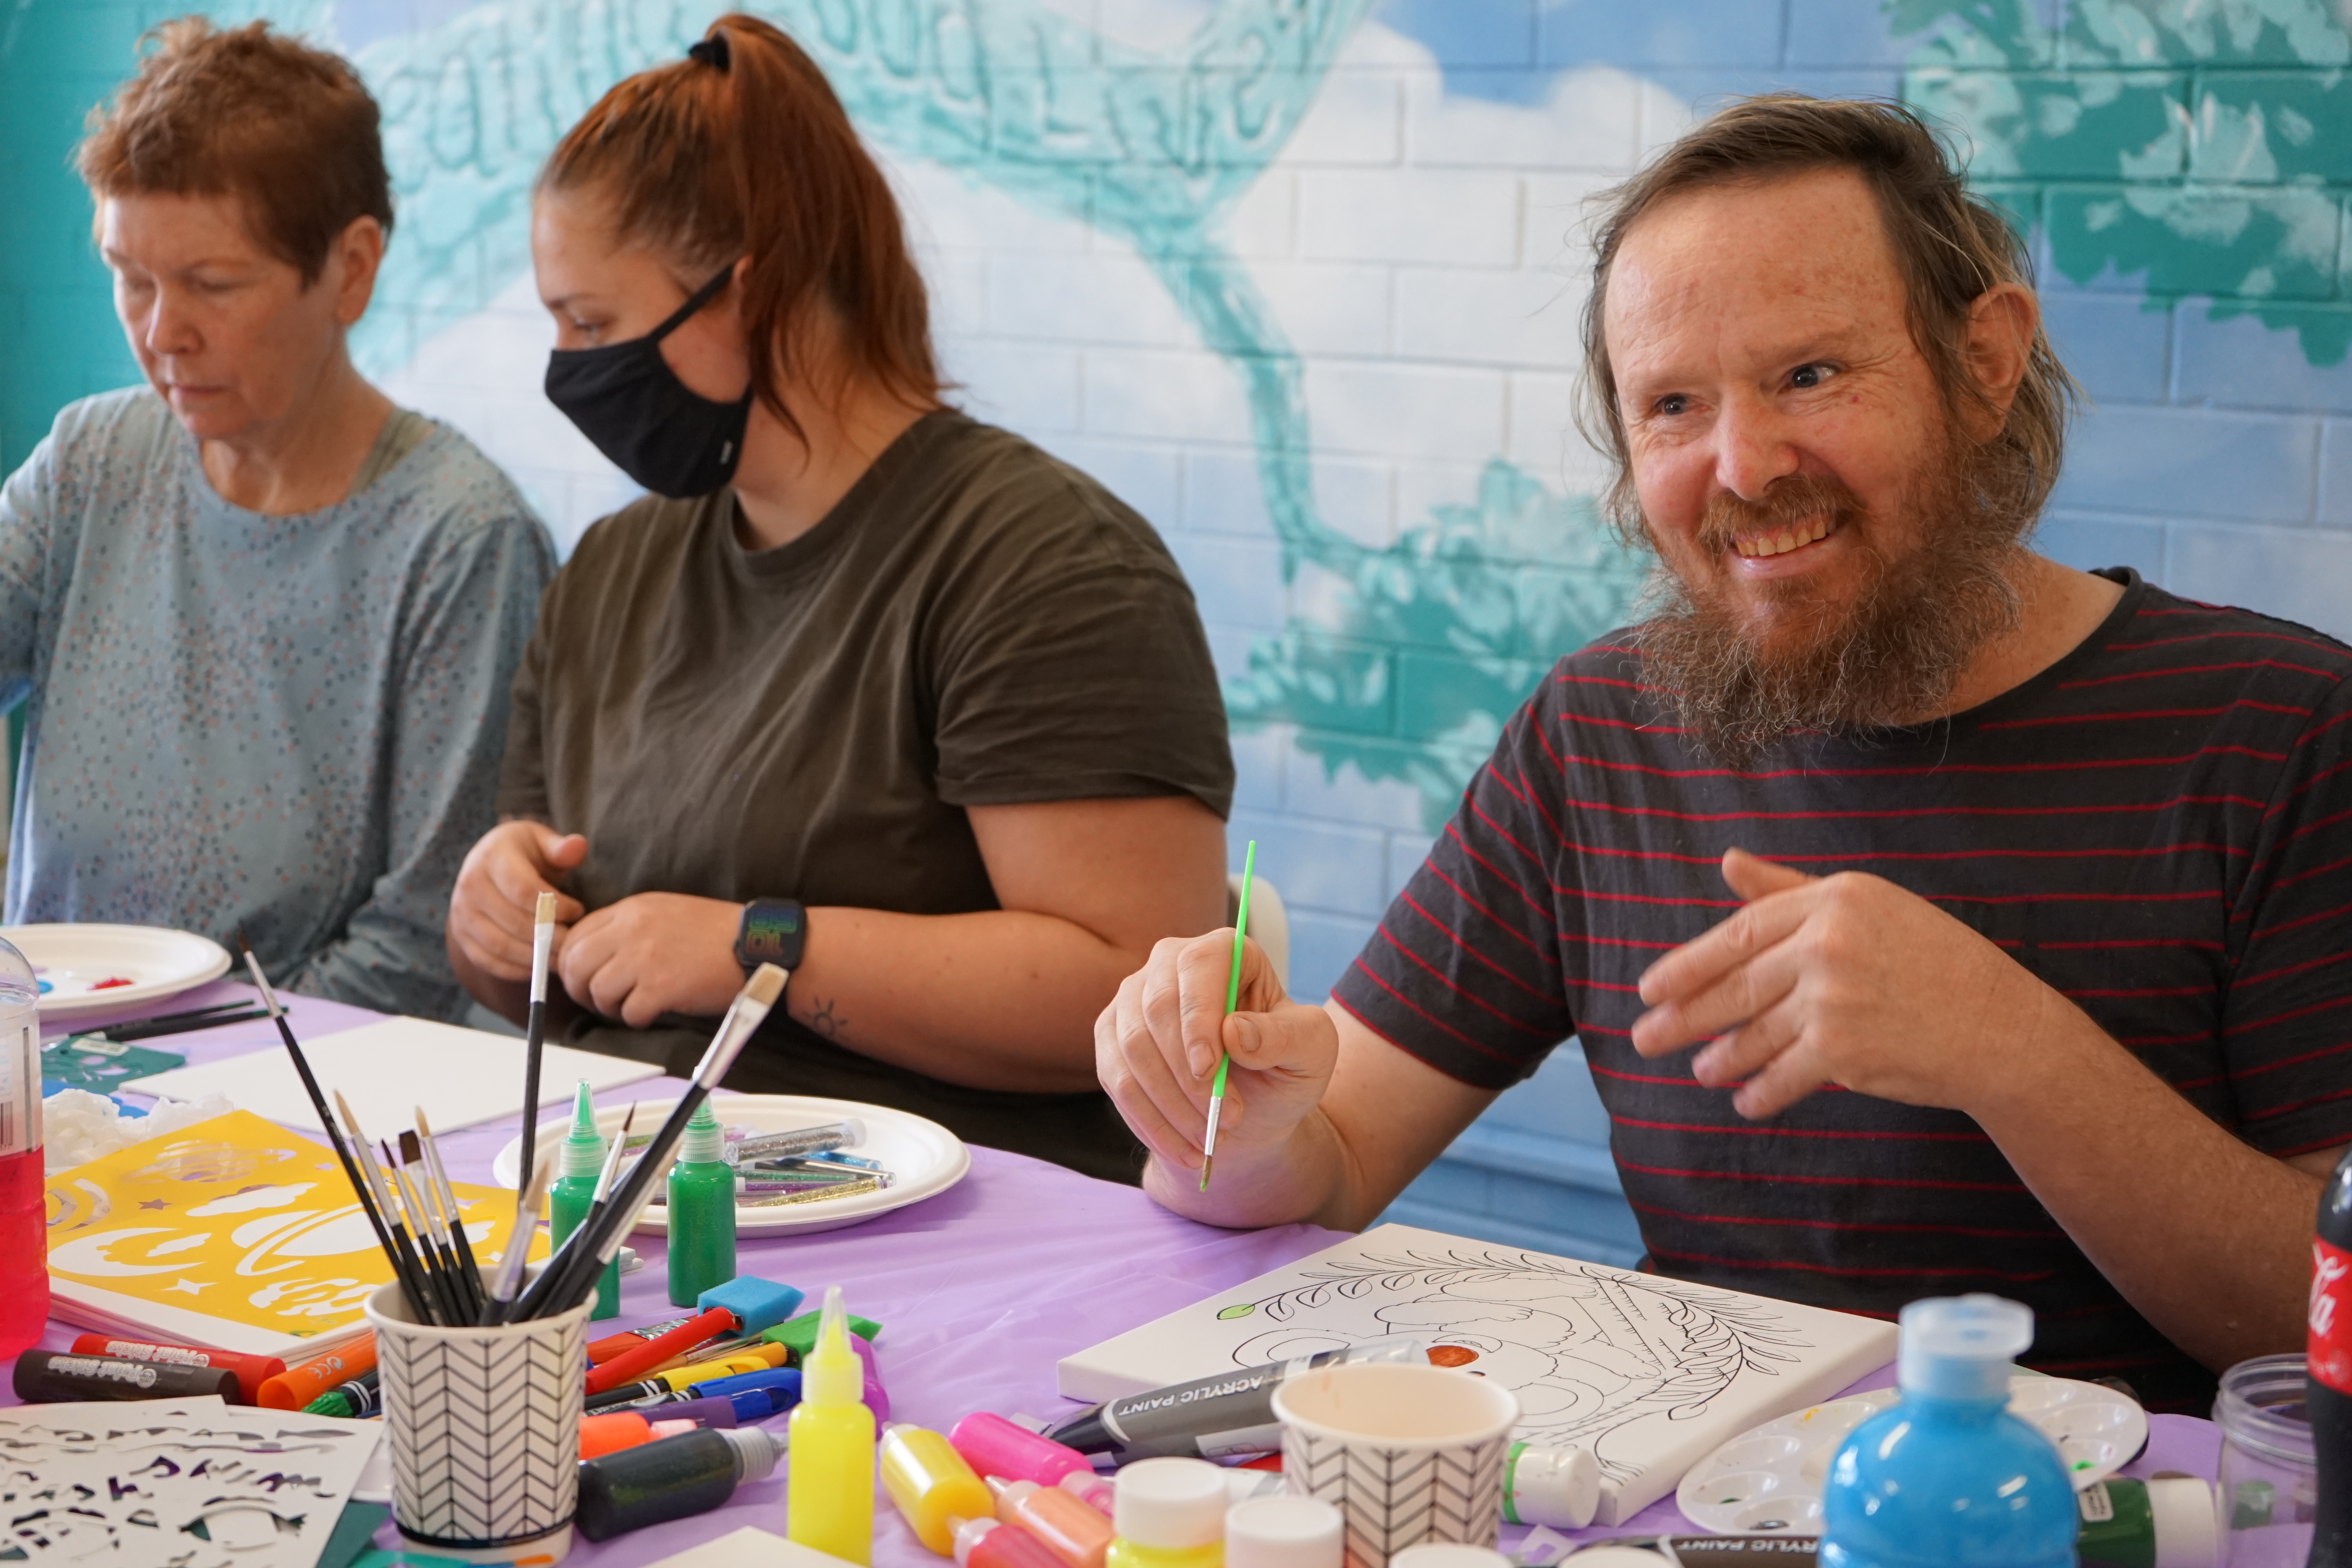 A smiling man paints while two women paint in the background